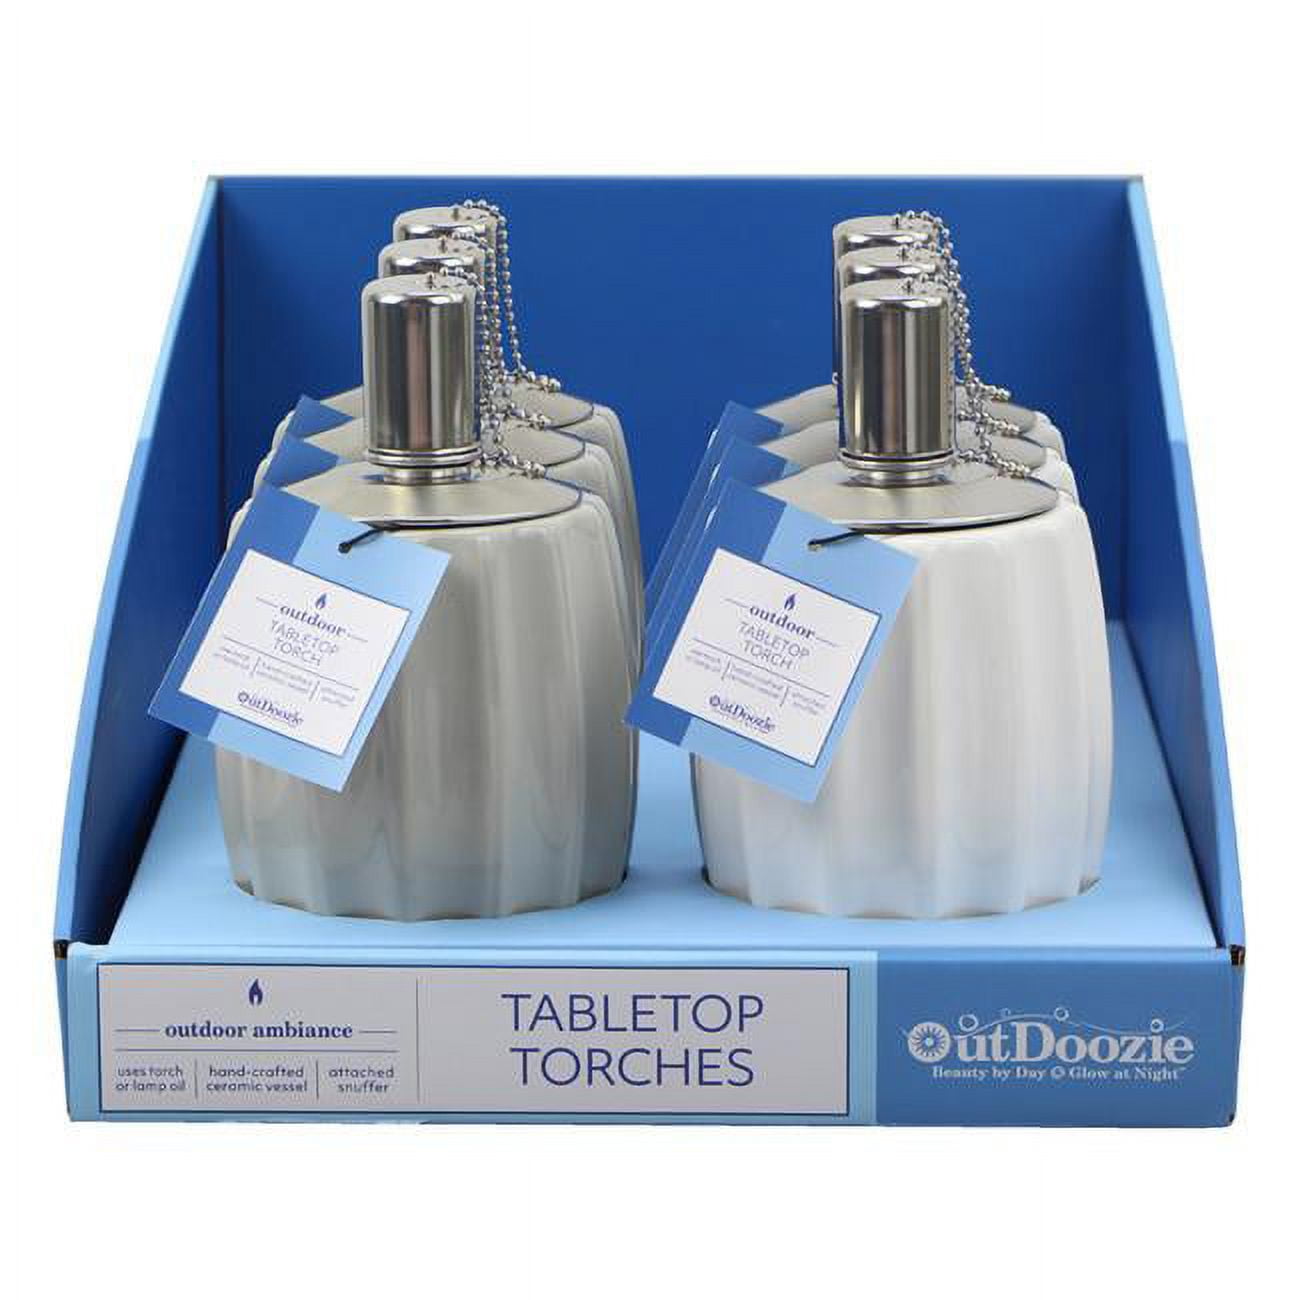 Picture of Outdoozie 8048438 6.89 in. Ceramic Contour Tabletop Torch - Pack of 6